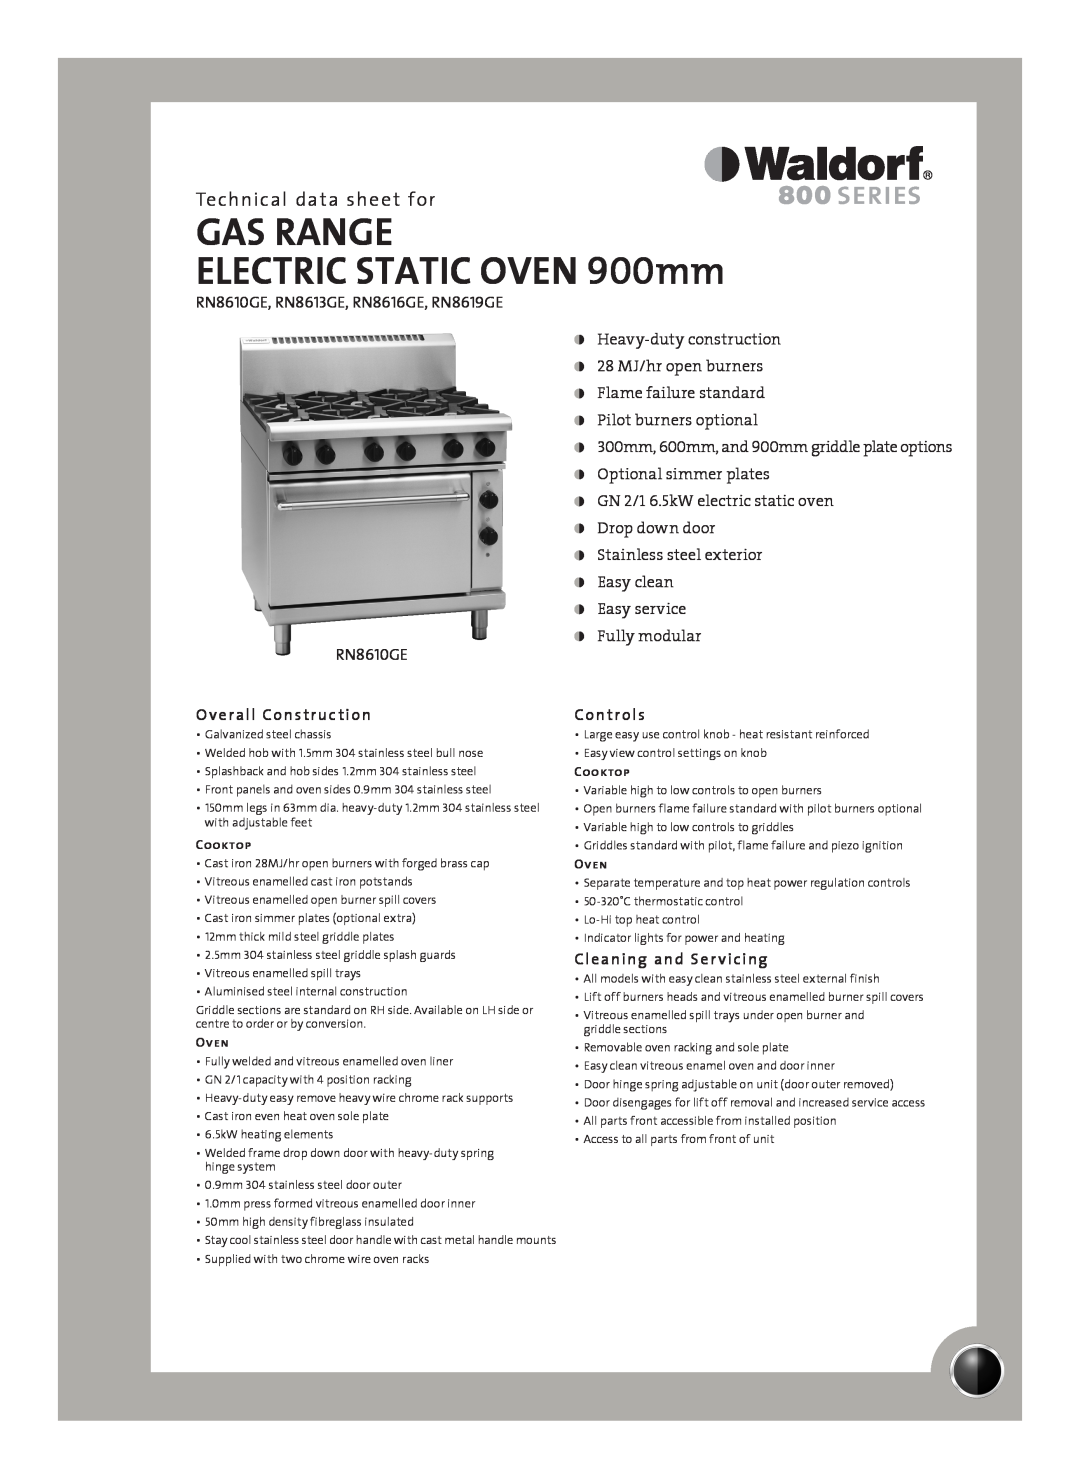 Moffat RN8616GE manual Technical data sheet for, Overall Construction, Controls, Cleaning and Ser vicing, Cooktop, Oven 